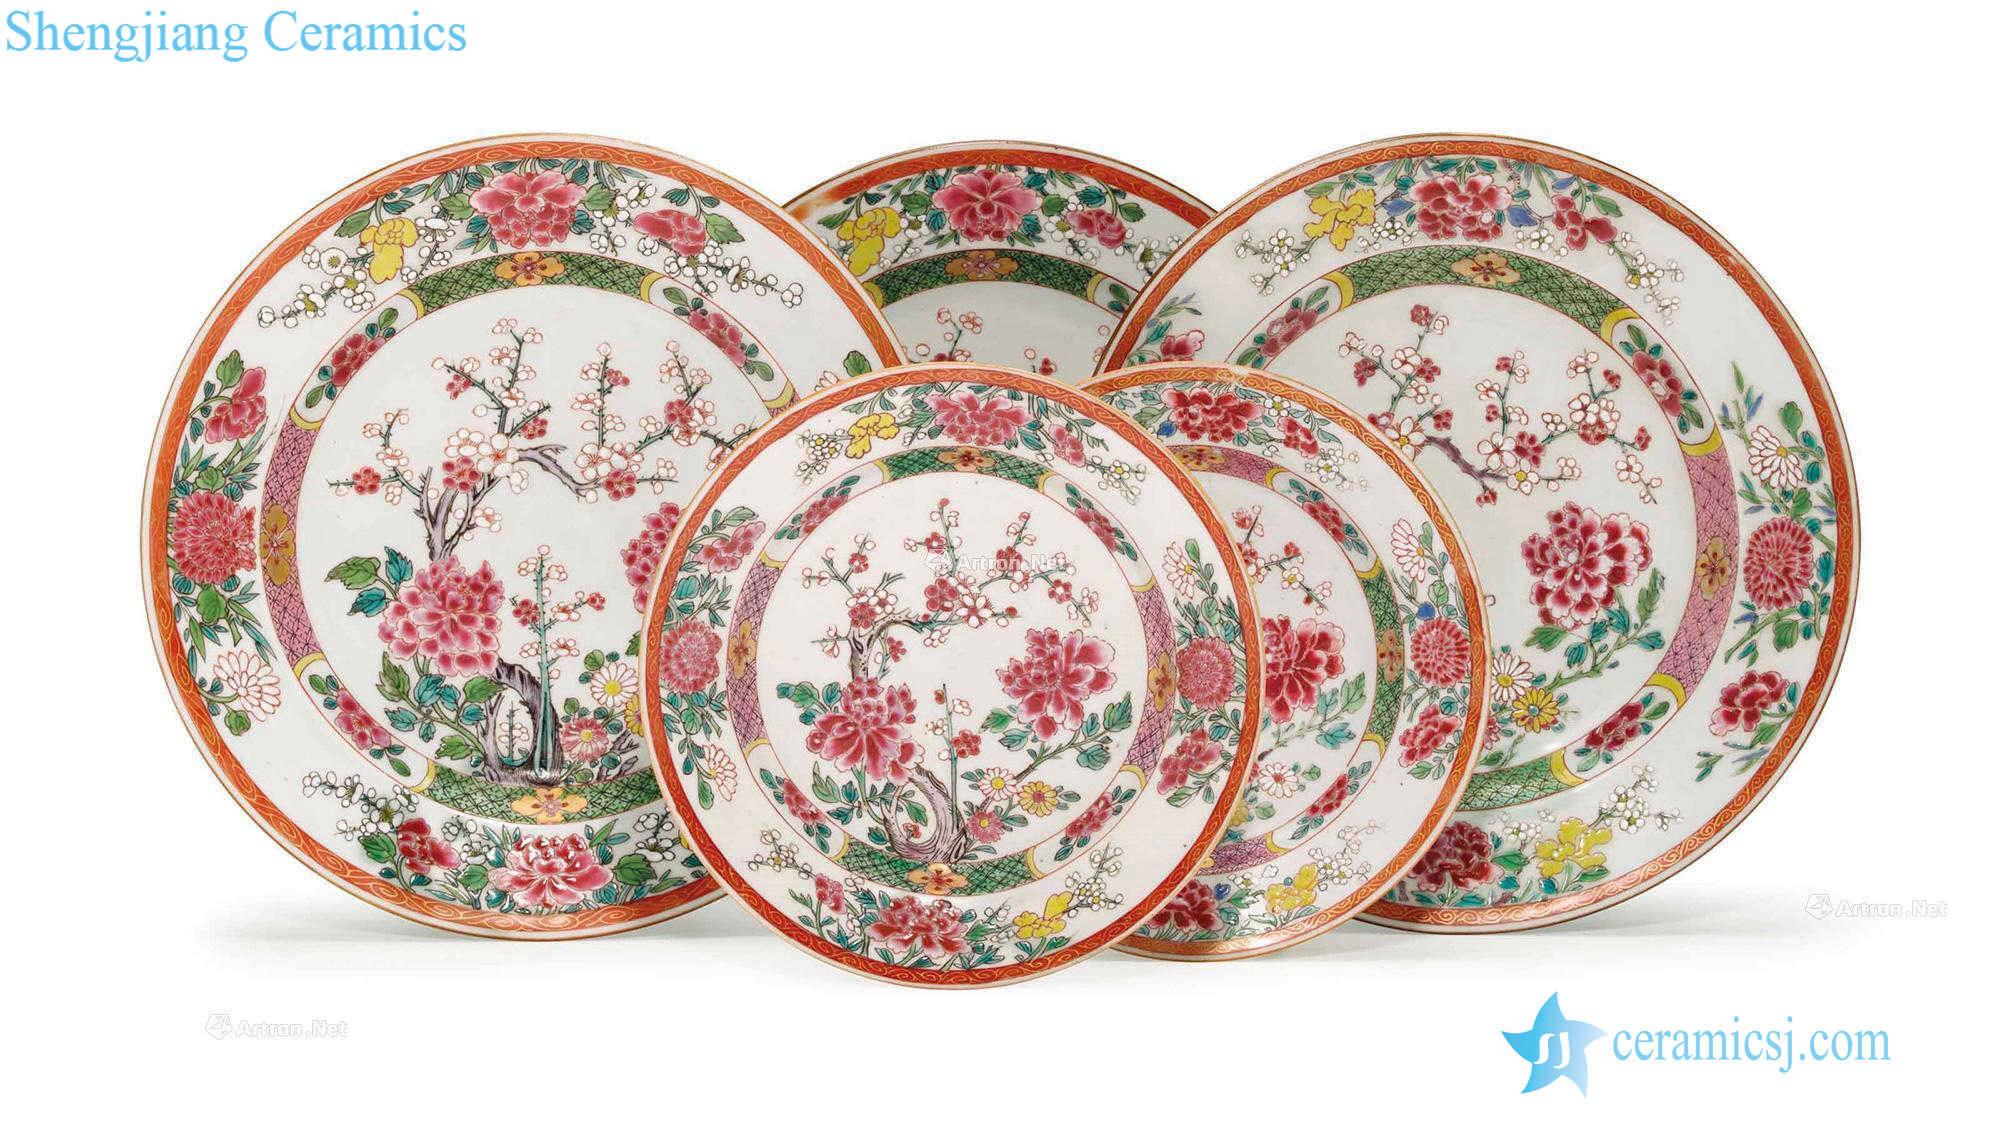 The qianlong period, 1735-96 - A SET OF FIVE FAMILLE ROSE DISHES